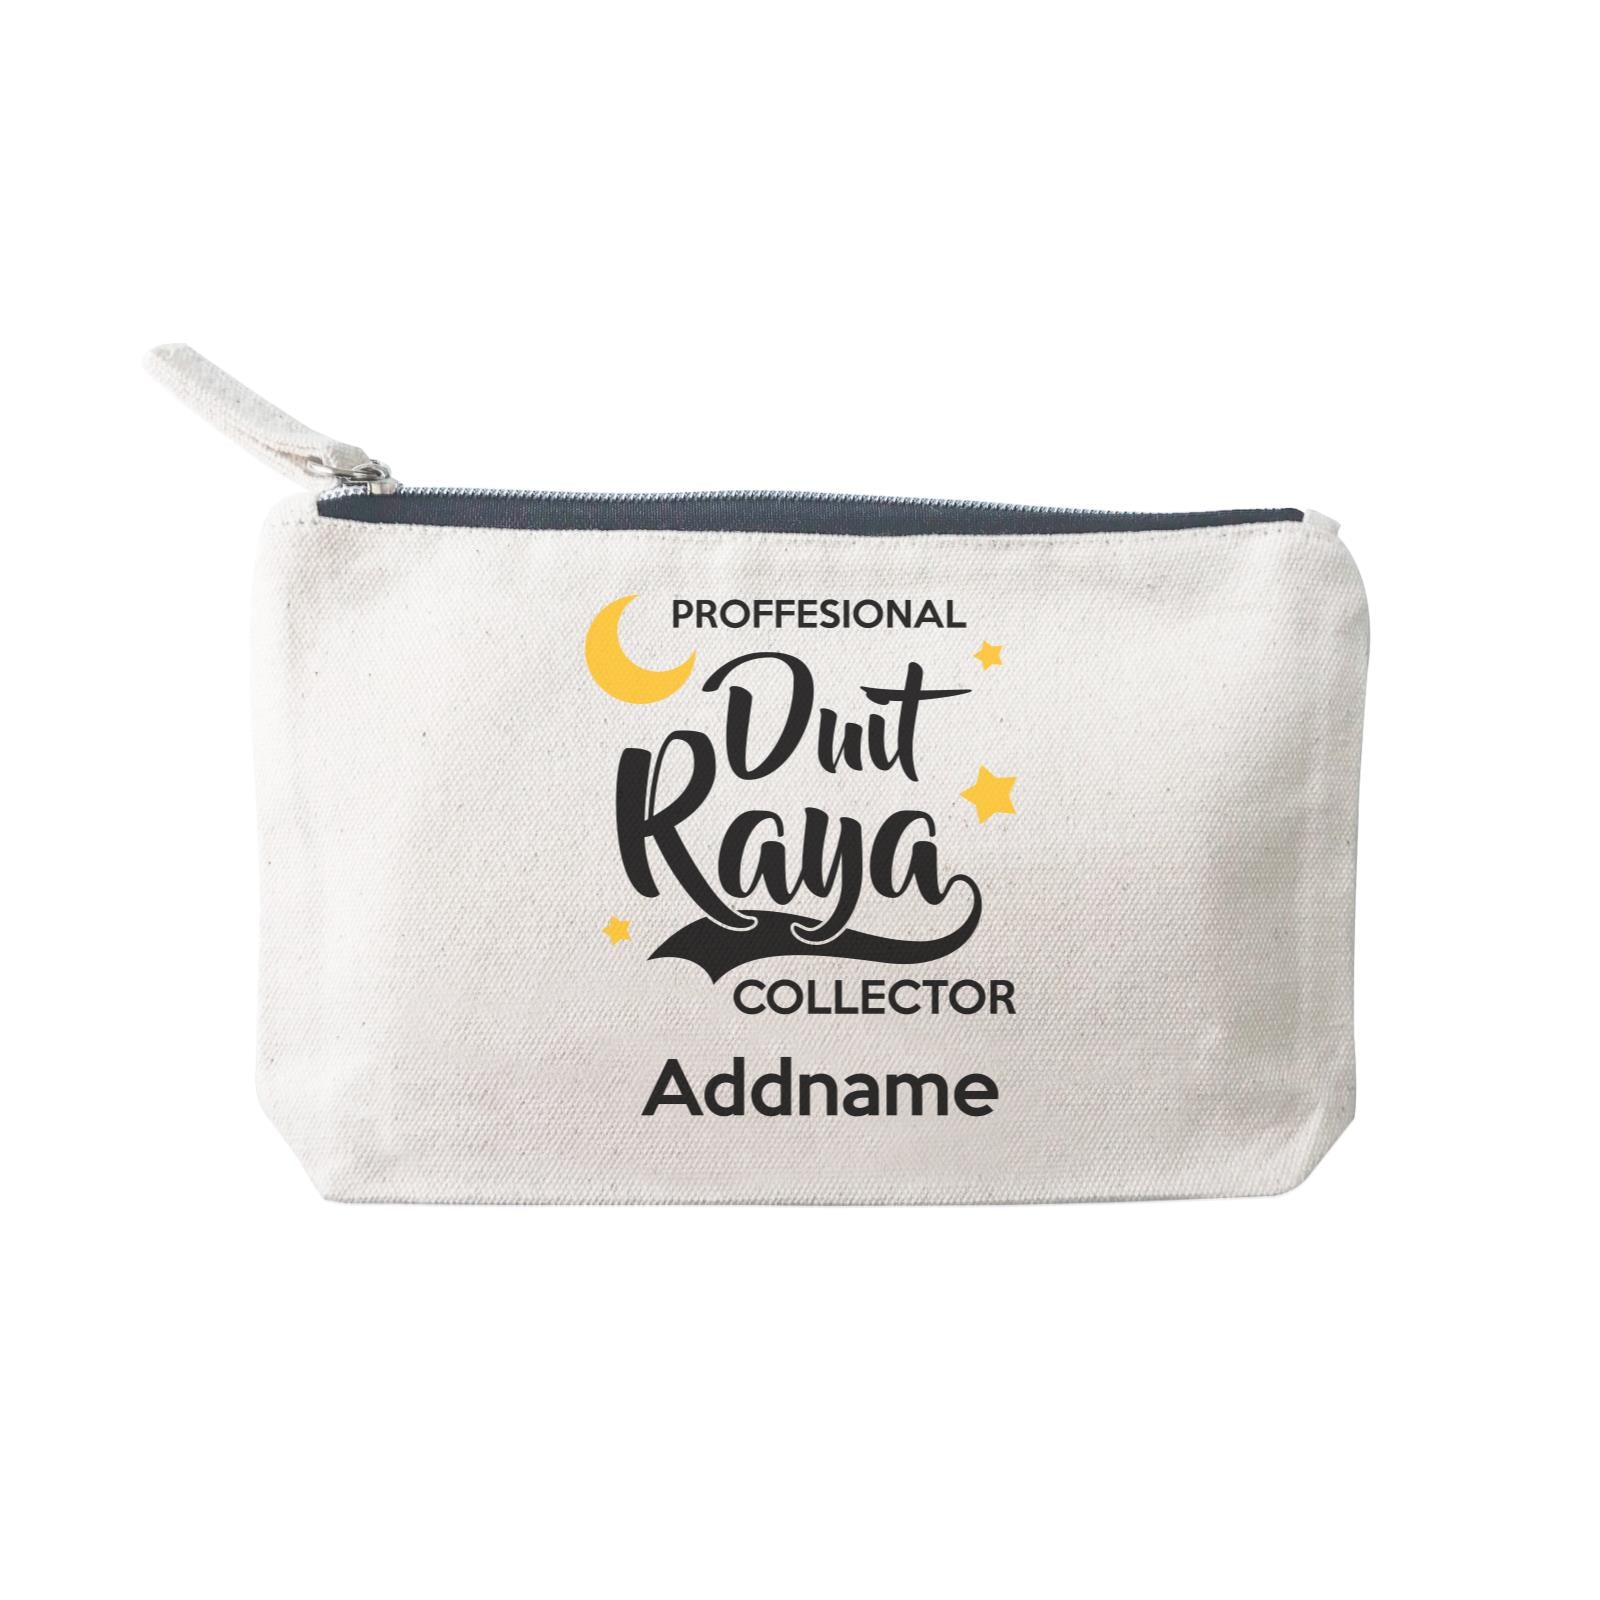 Raya Typography Professional Duit Raya Collector Addname Mini Accessories Stationery Pouch 2